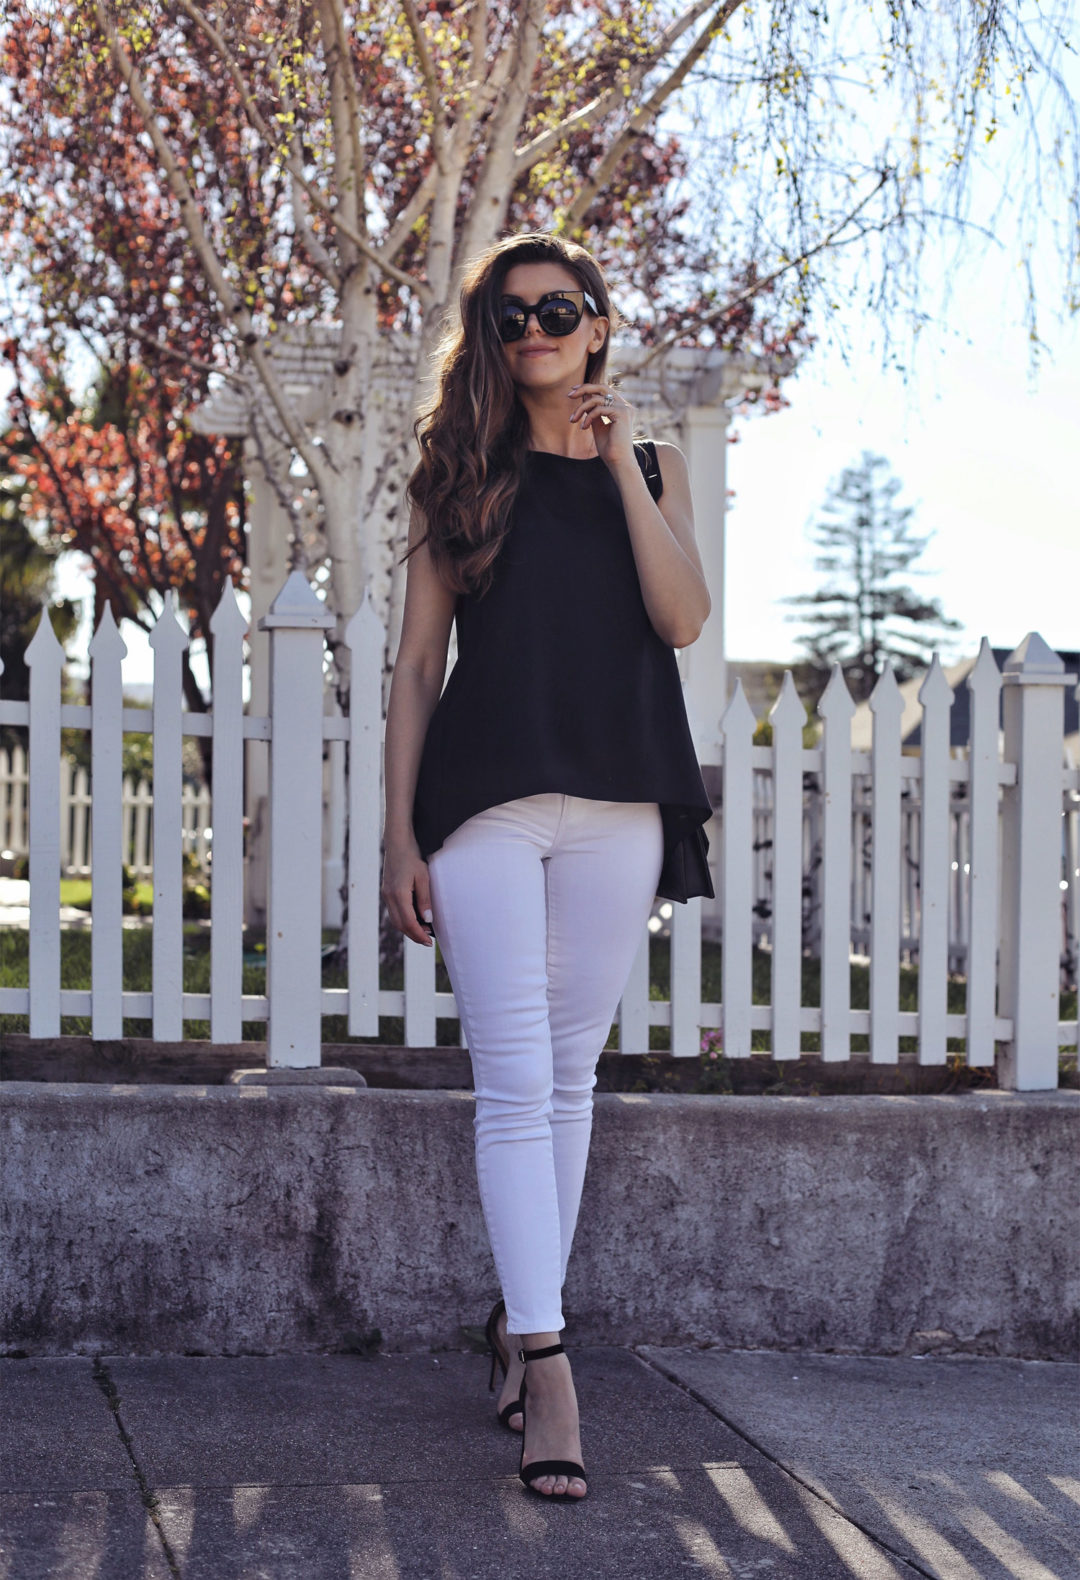 Fashion and lifestyle blogger Adelina Perrin of The Charming Olive wearing Stitch Fix Black Top and White Jeans